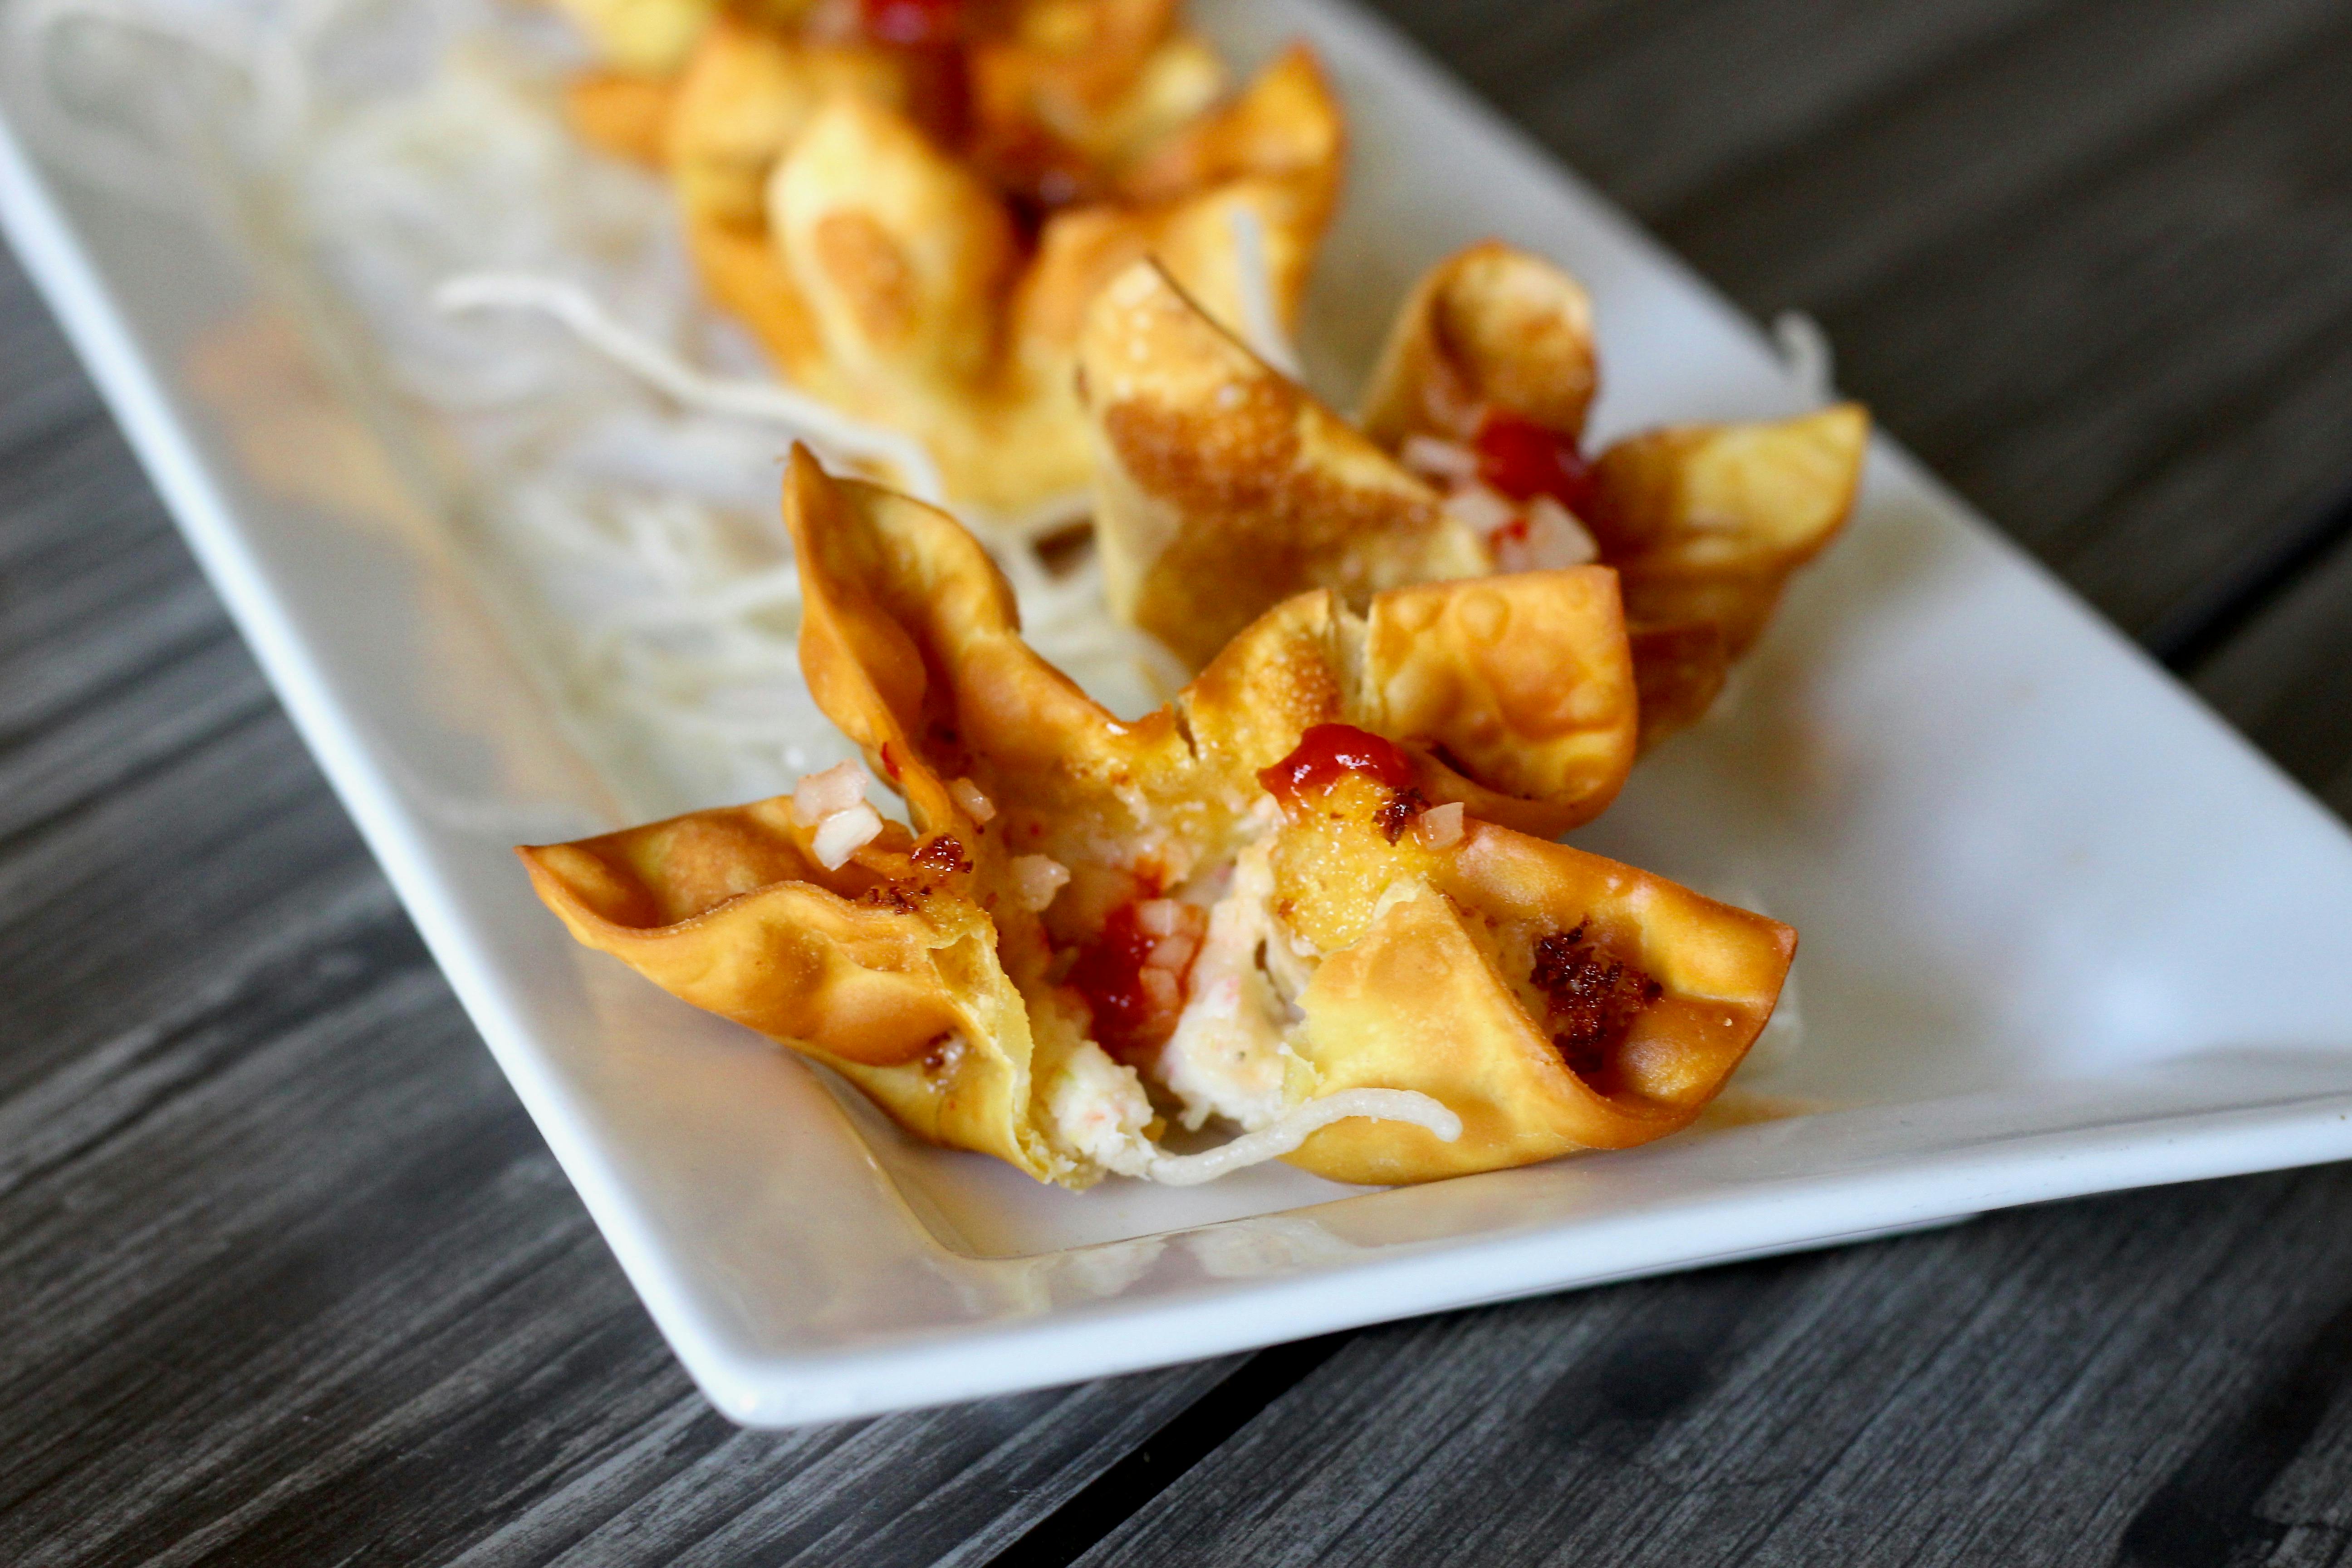 A3. Crab Cheese Wonton from Little Asia in Richmond, VA